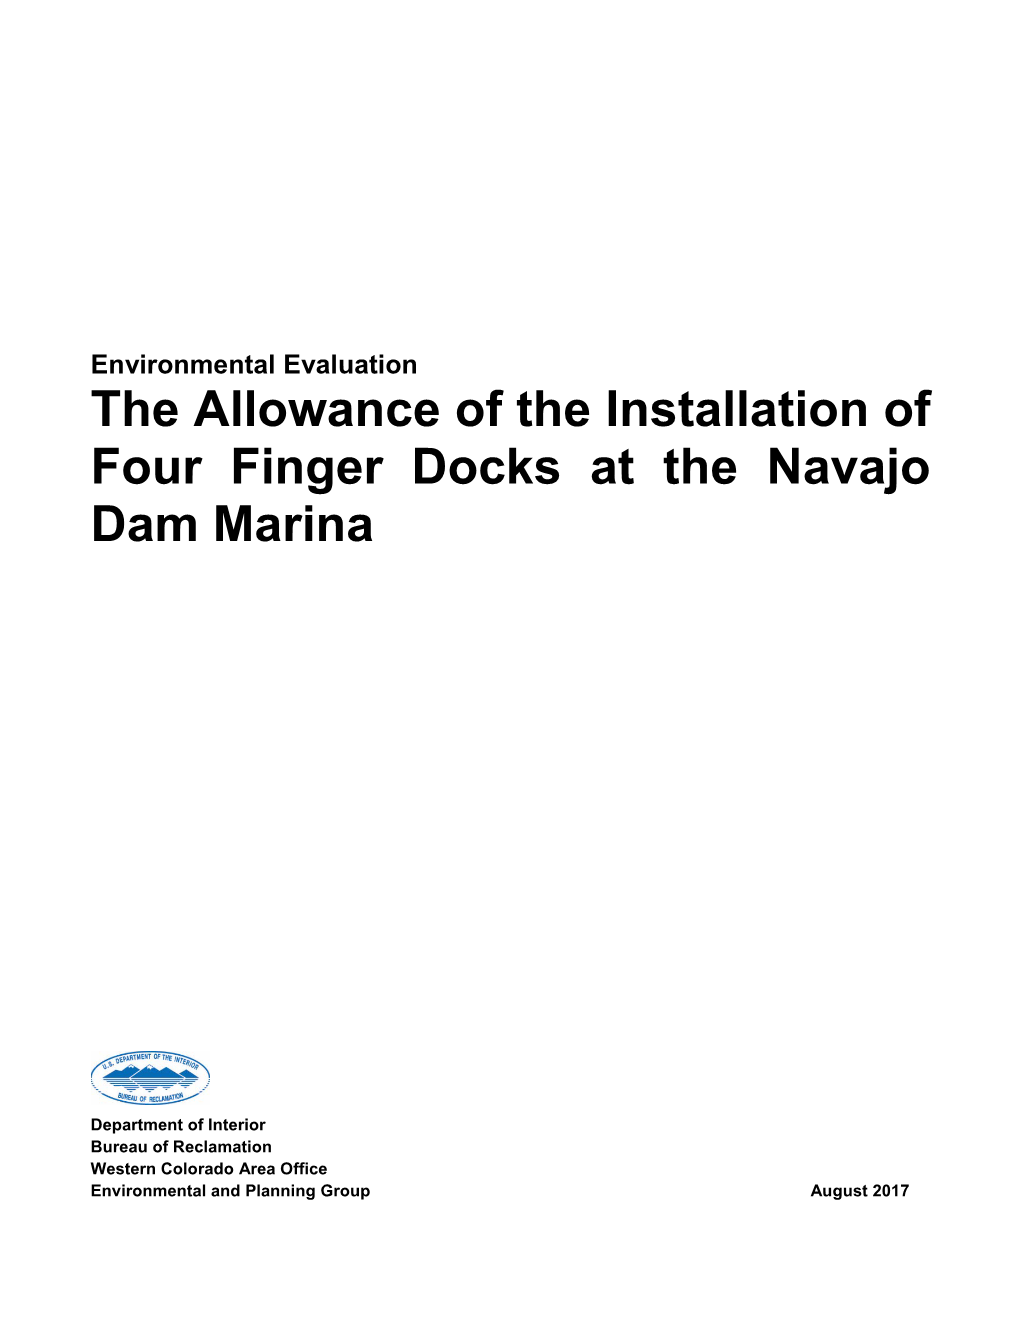 The Allowance of the Installation of Four Finger Docks at the Navajo Dam Marina